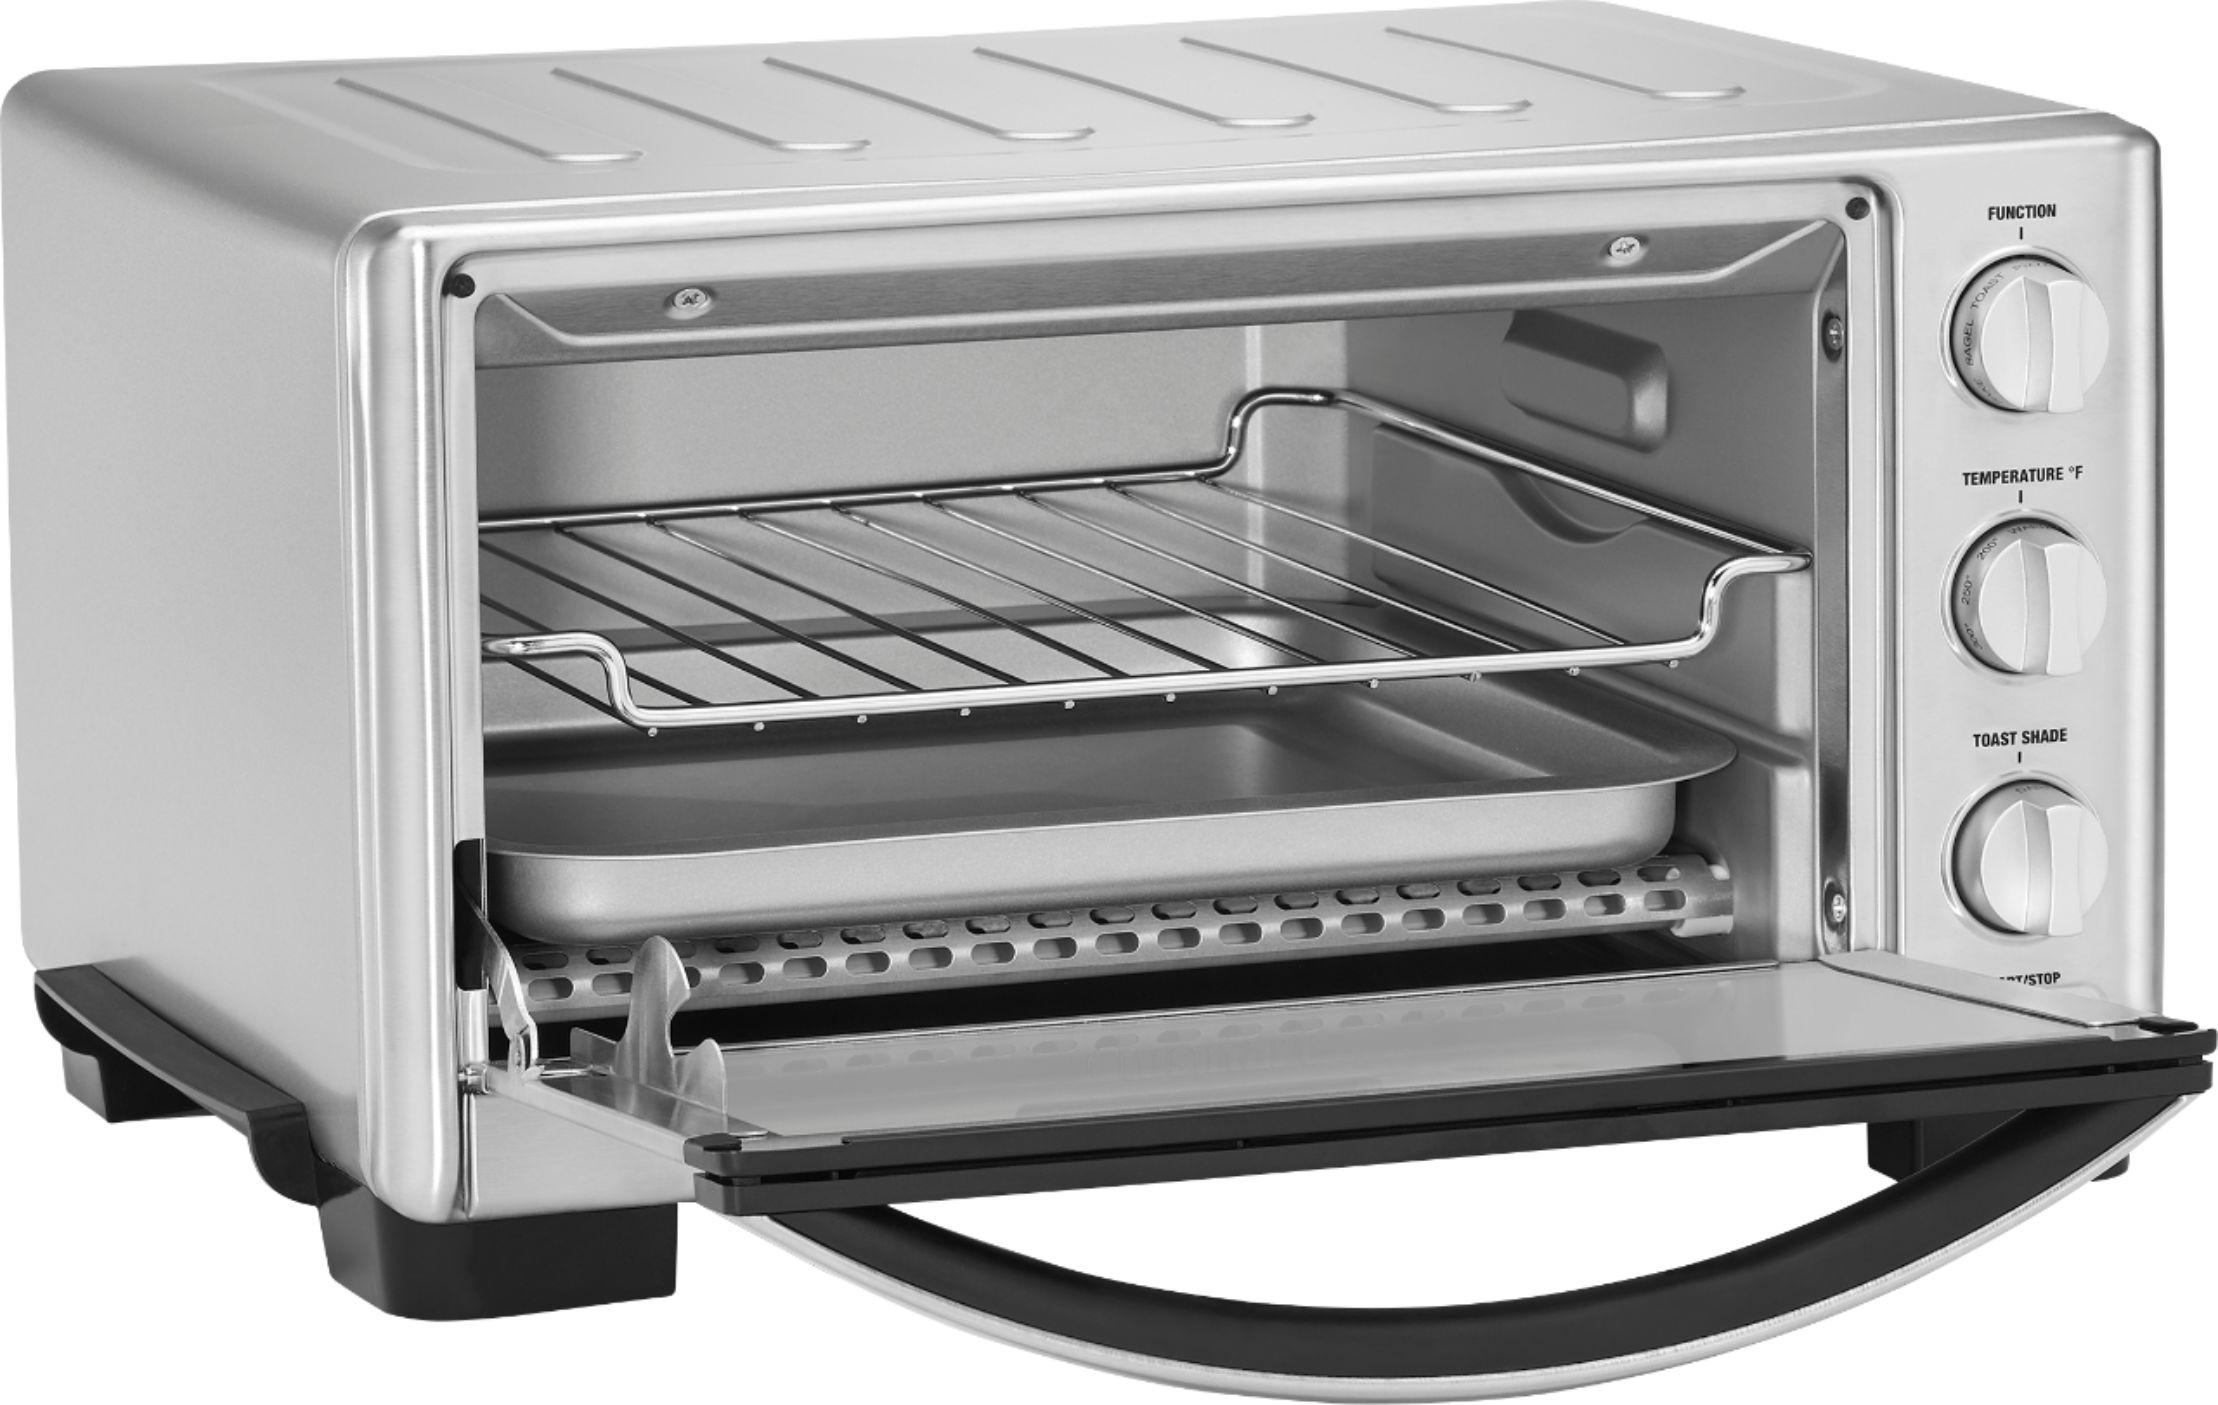 Angle View: GE - Quartz 6-Slice Toaster Oven with Convection Bake - Stainless Steel